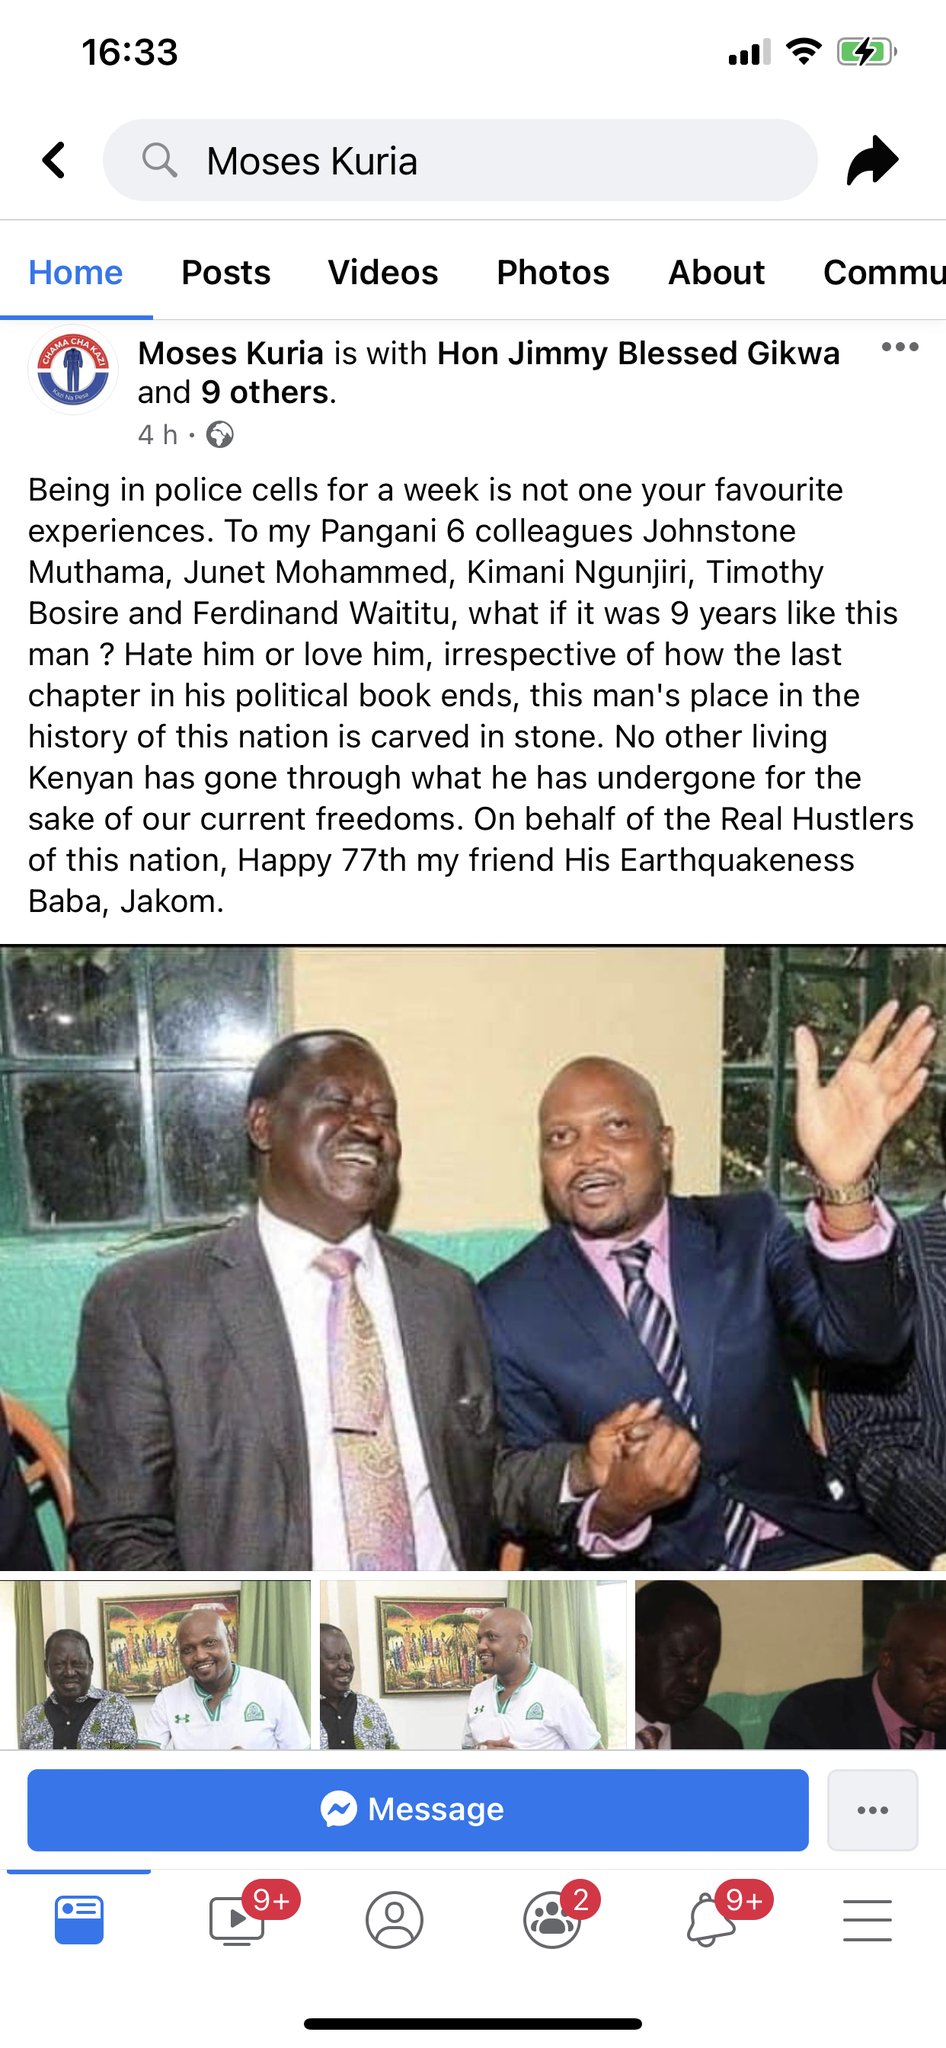 Moses Kuria joins other politicians in wishing Raila Odinga a happy 77th birthday. 